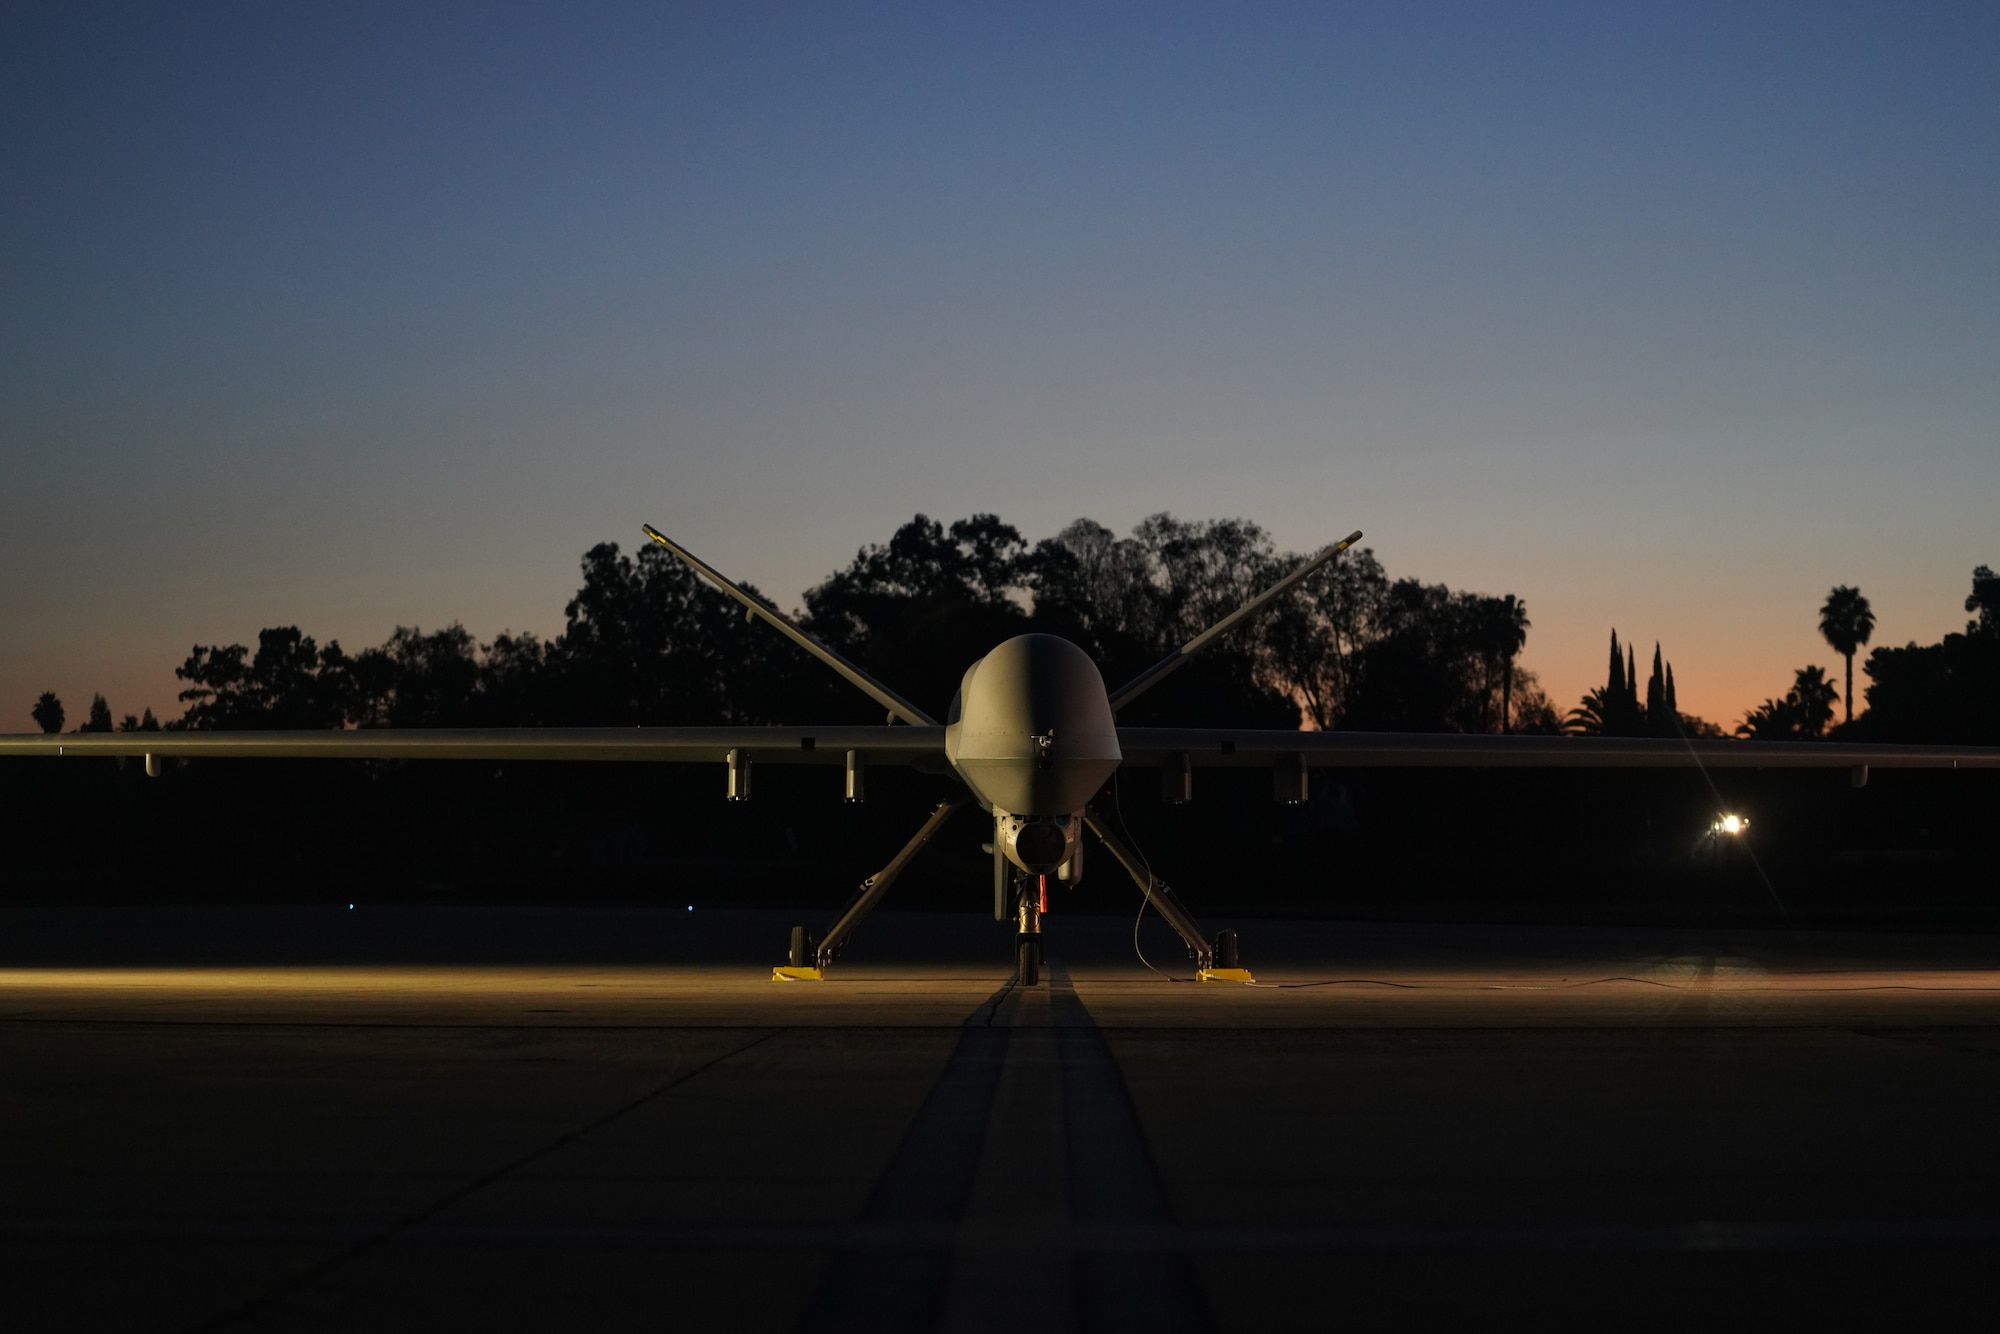 An unmanned aircraft sits on a flight line during sunset.